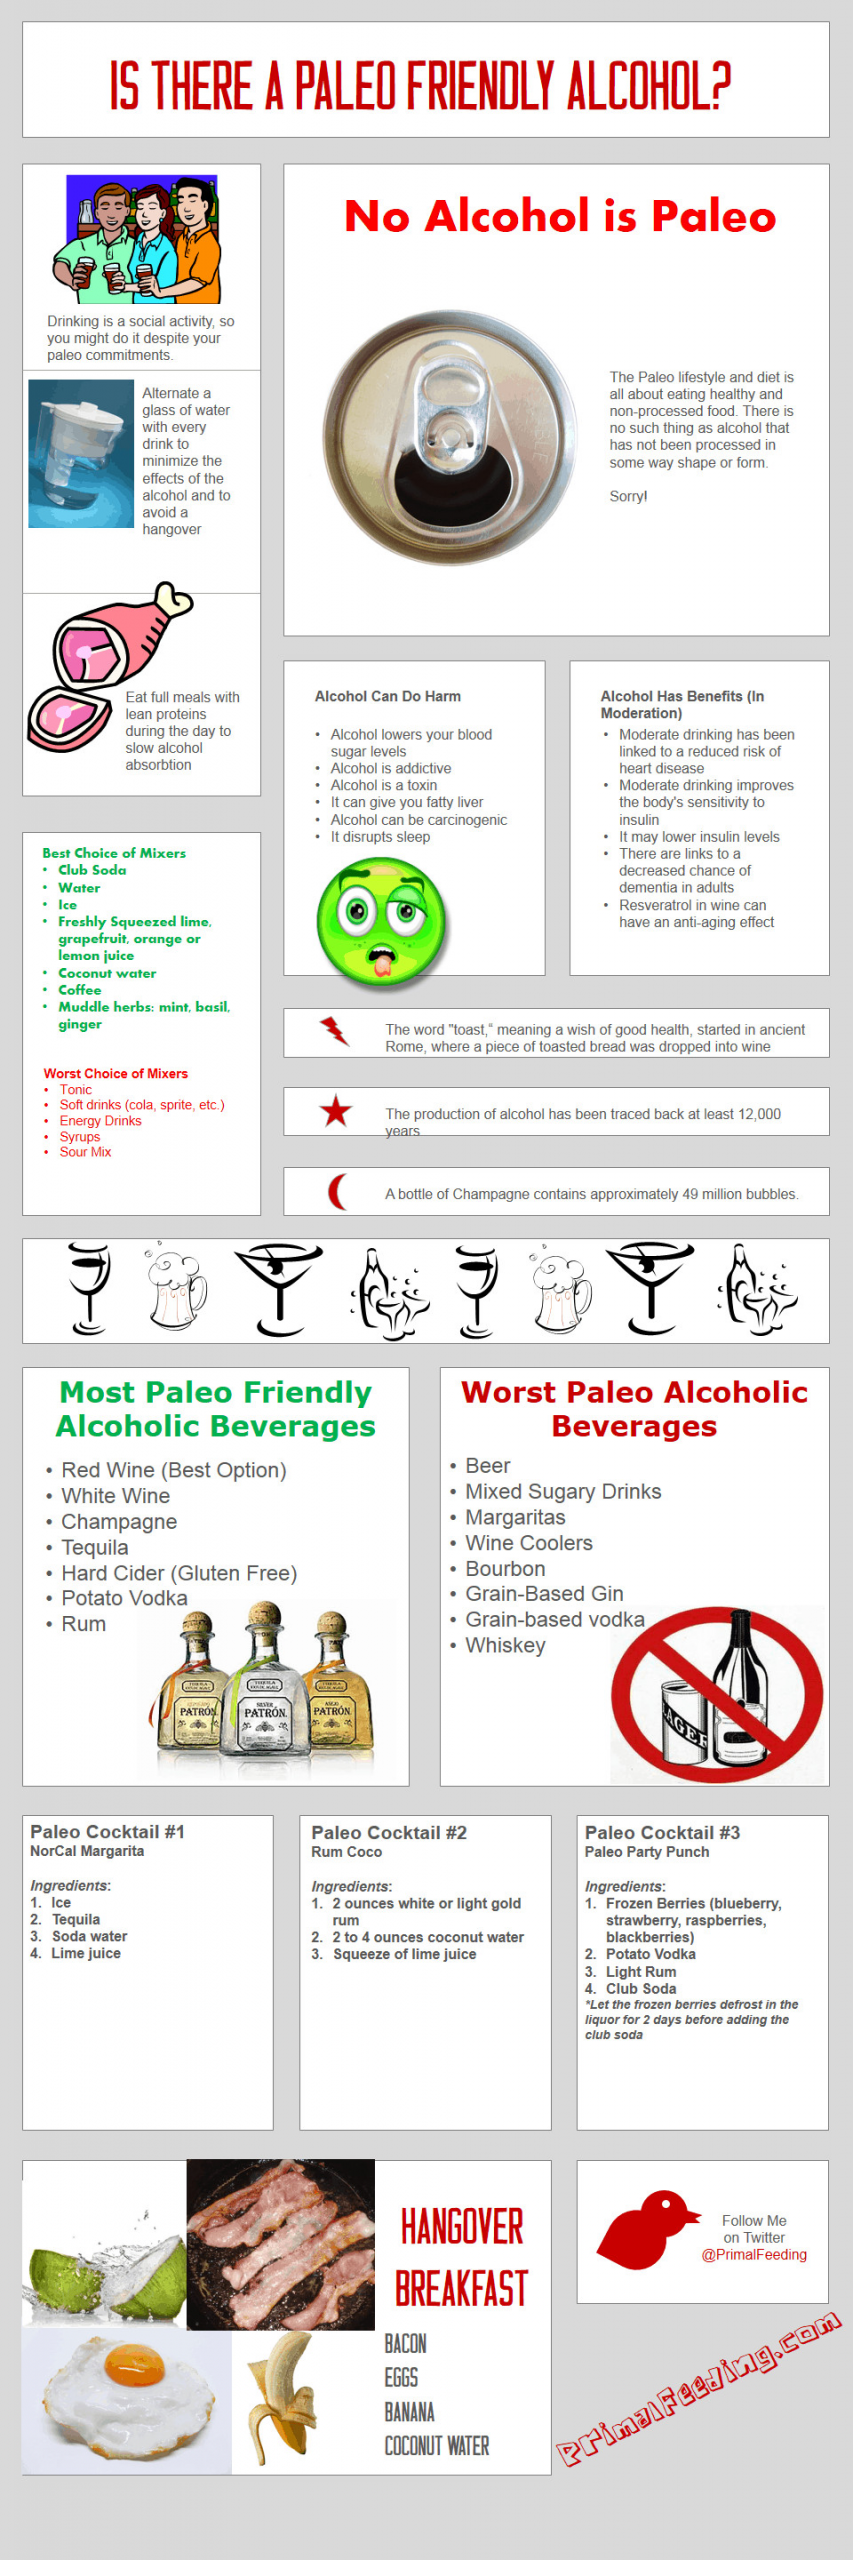 Paleo Diet Alcohol
 Paleo Friendly Alcohol Guide [Infographic]